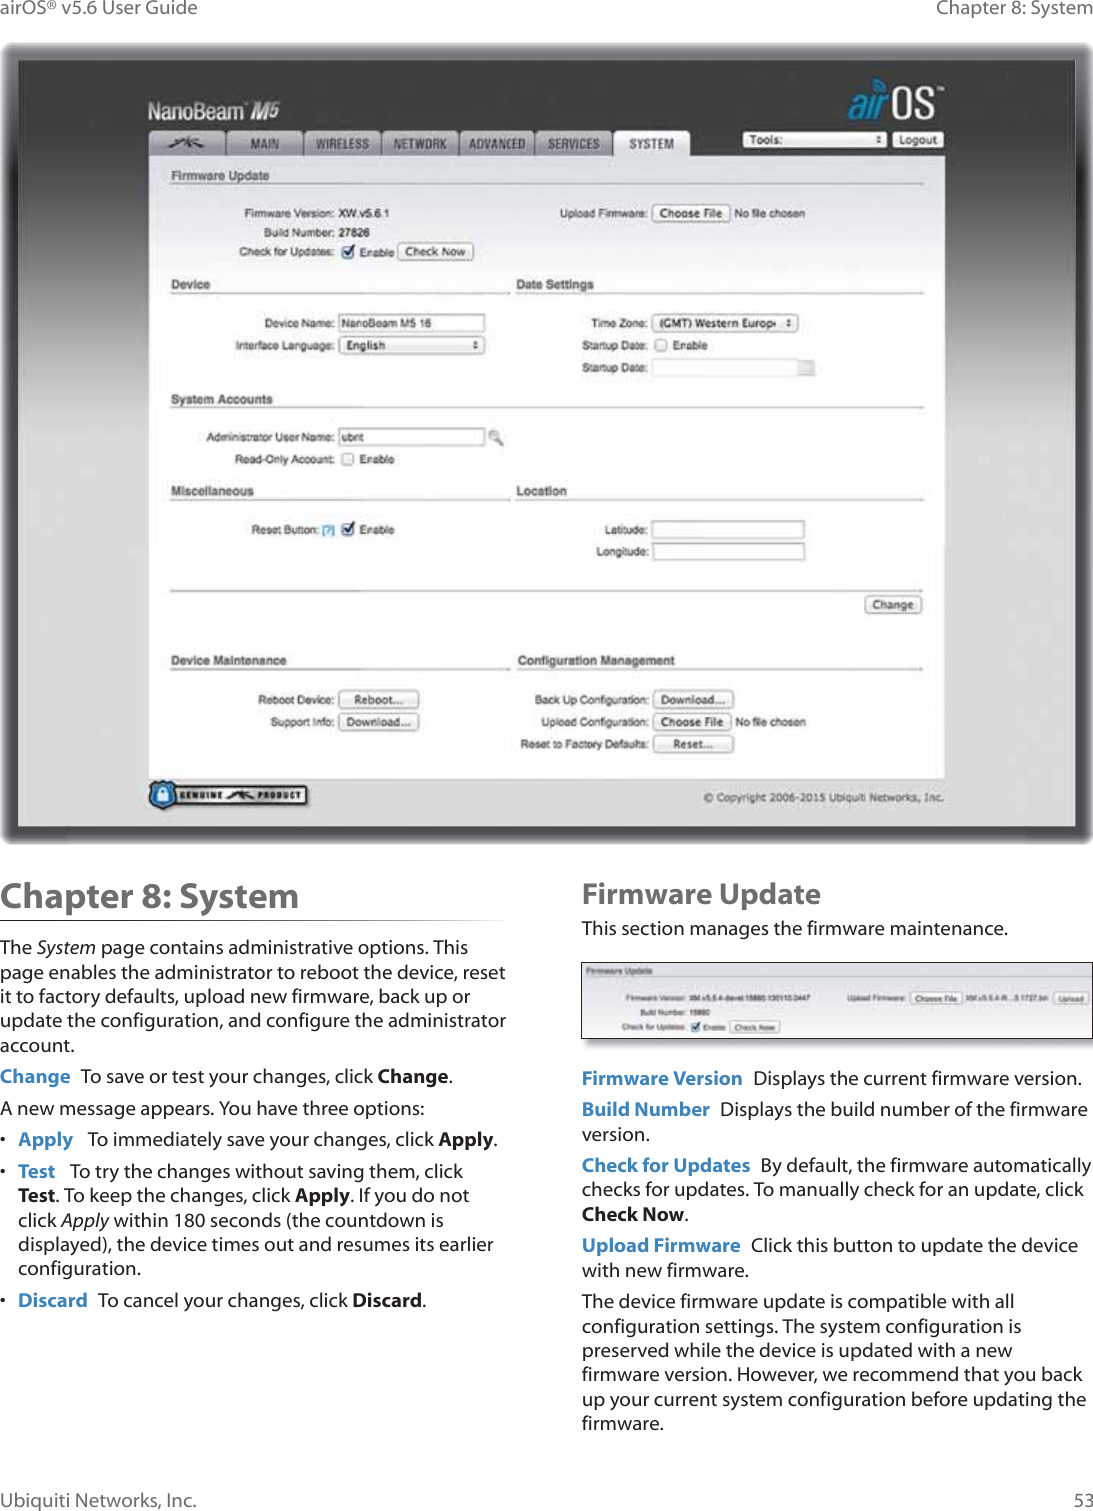 53Chapter 8: SystemairOS® v5.6 User GuideUbiquiti Networks, Inc.Chapter 8: SystemThe System page contains administrative options. This page enables the administrator to reboot the device, reset it to factory defaults, upload new firmware, back up or update the configuration, and configure the administrator account.Change  To save or test your changes, click Change.A new message appears. You have three options:•  Apply   To immediately save your changes, click Apply.•  Test   To try the changes without saving them, click Test. To keep the changes, click Apply. If you do not click Apply within 180 seconds (the countdown is displayed), the device times out and resumes its earlier configuration.•  Discard  To cancel your changes, click Discard.Firmware UpdateThis section manages the firmware maintenance.Firmware Version  Displays the current firmware version.Build Number  Displays the build number of the firmware version.Check for Updates  By default, the firmware automatically checks for updates. To manually check for an update, click Check Now.Upload Firmware  Click this button to update the device with new firmware.The device firmware update is compatible with all configuration settings. The system configuration is preserved while the device is updated with a new firmware version. However, we recommend that you back up your current system configuration before updating the firmware. 